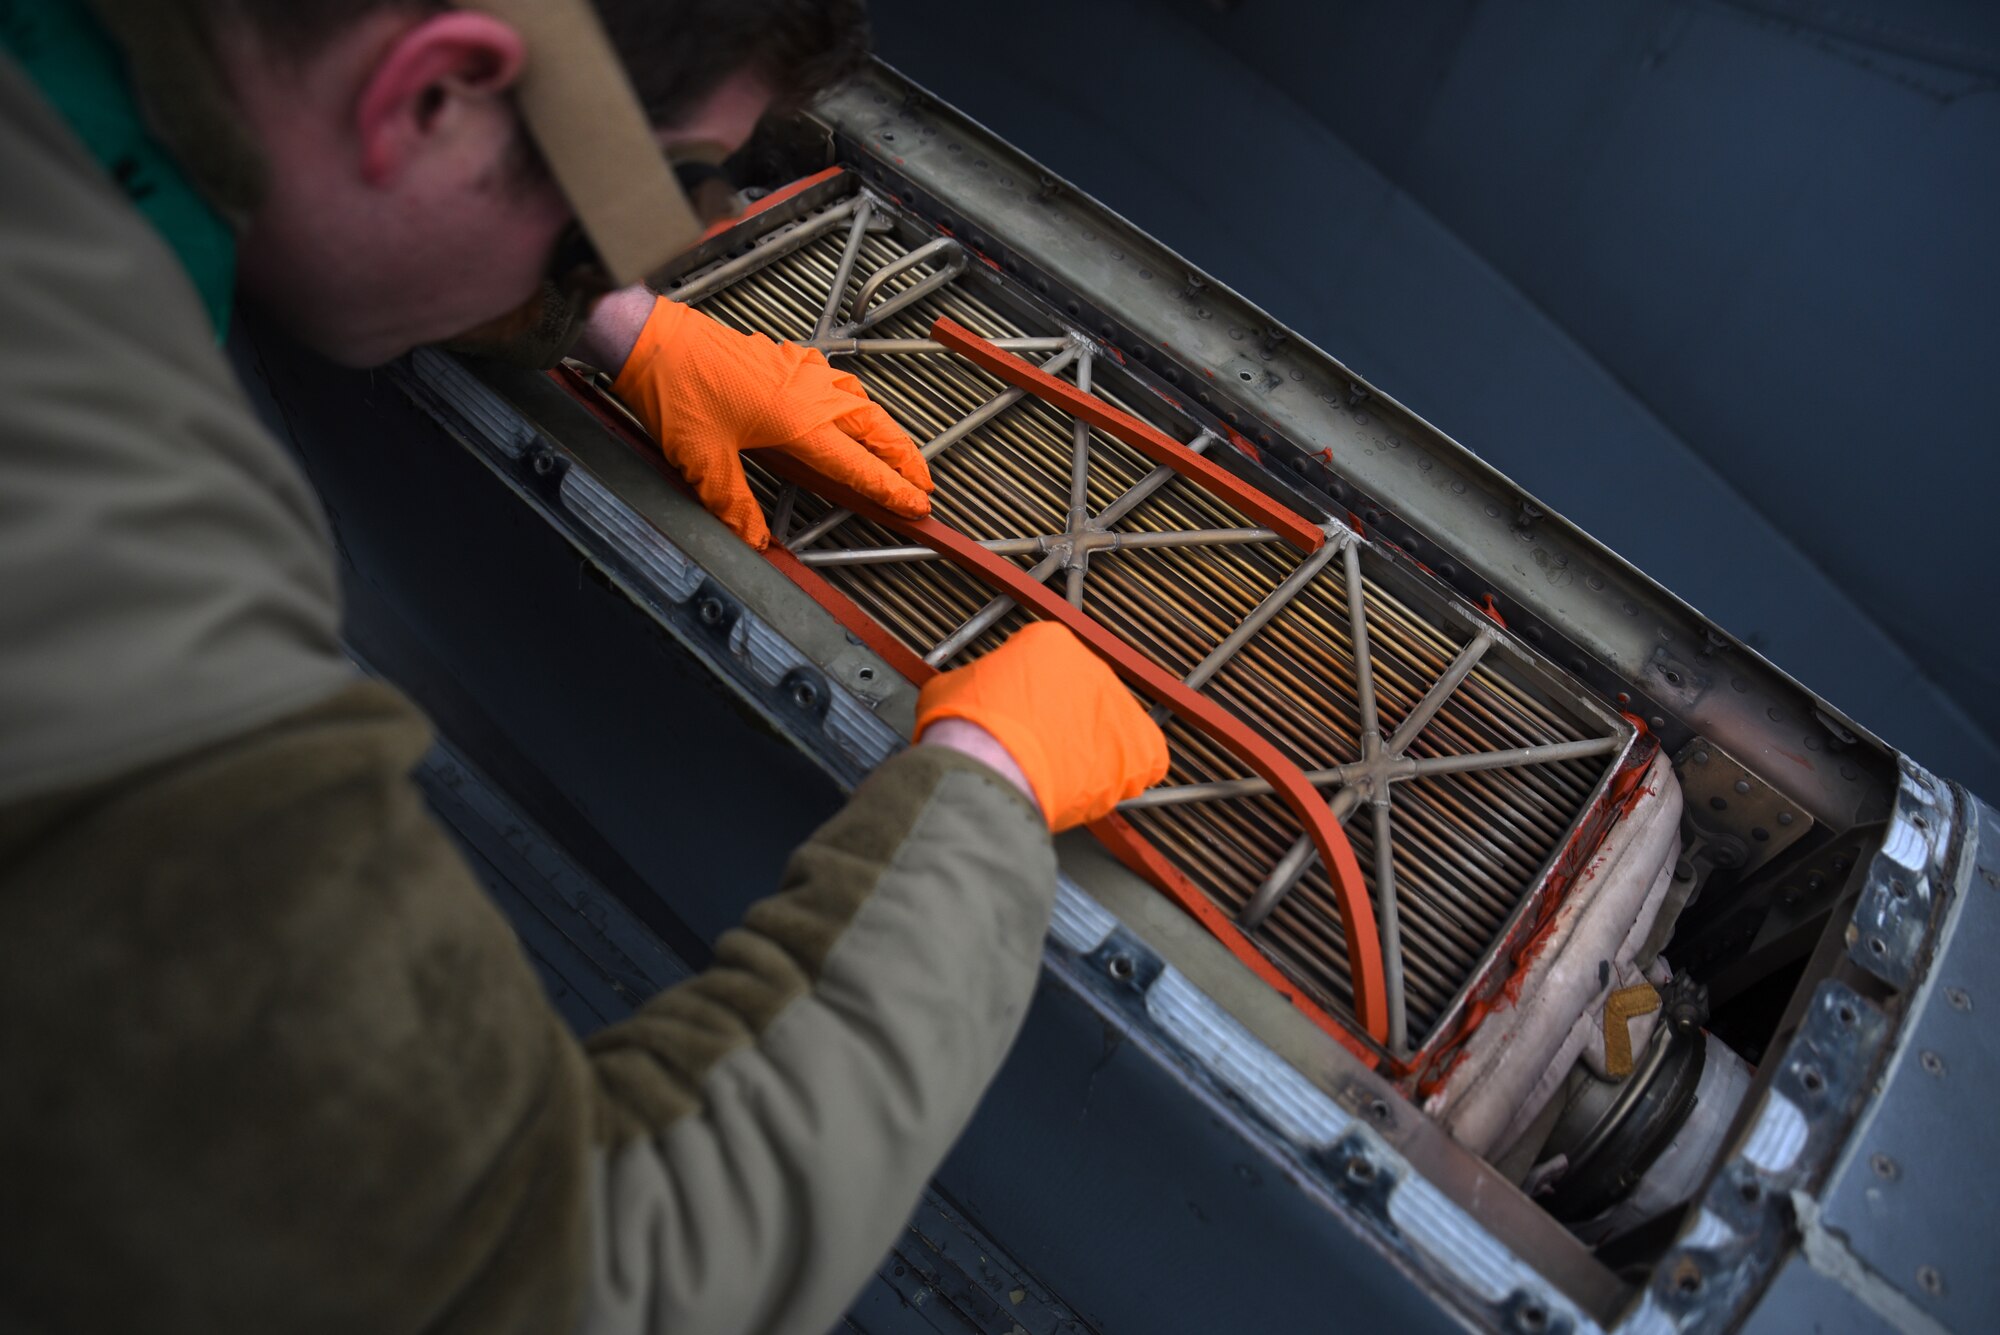 U.S. Air Force Airman 1st Class Travis Miller, electrical and environmental journeyman with the 62d Aircraft Maintenance Squadron, installs seals on the engine precooler on a C-17 Globemaster III at Joint Base Lewis-McChord, Washington, Feb. 3, 2023. The precooler cools the hot engine air to a suitable level for use in the air conditioning system. (U.S. Air Force photo by Airman Kylee Tyus)